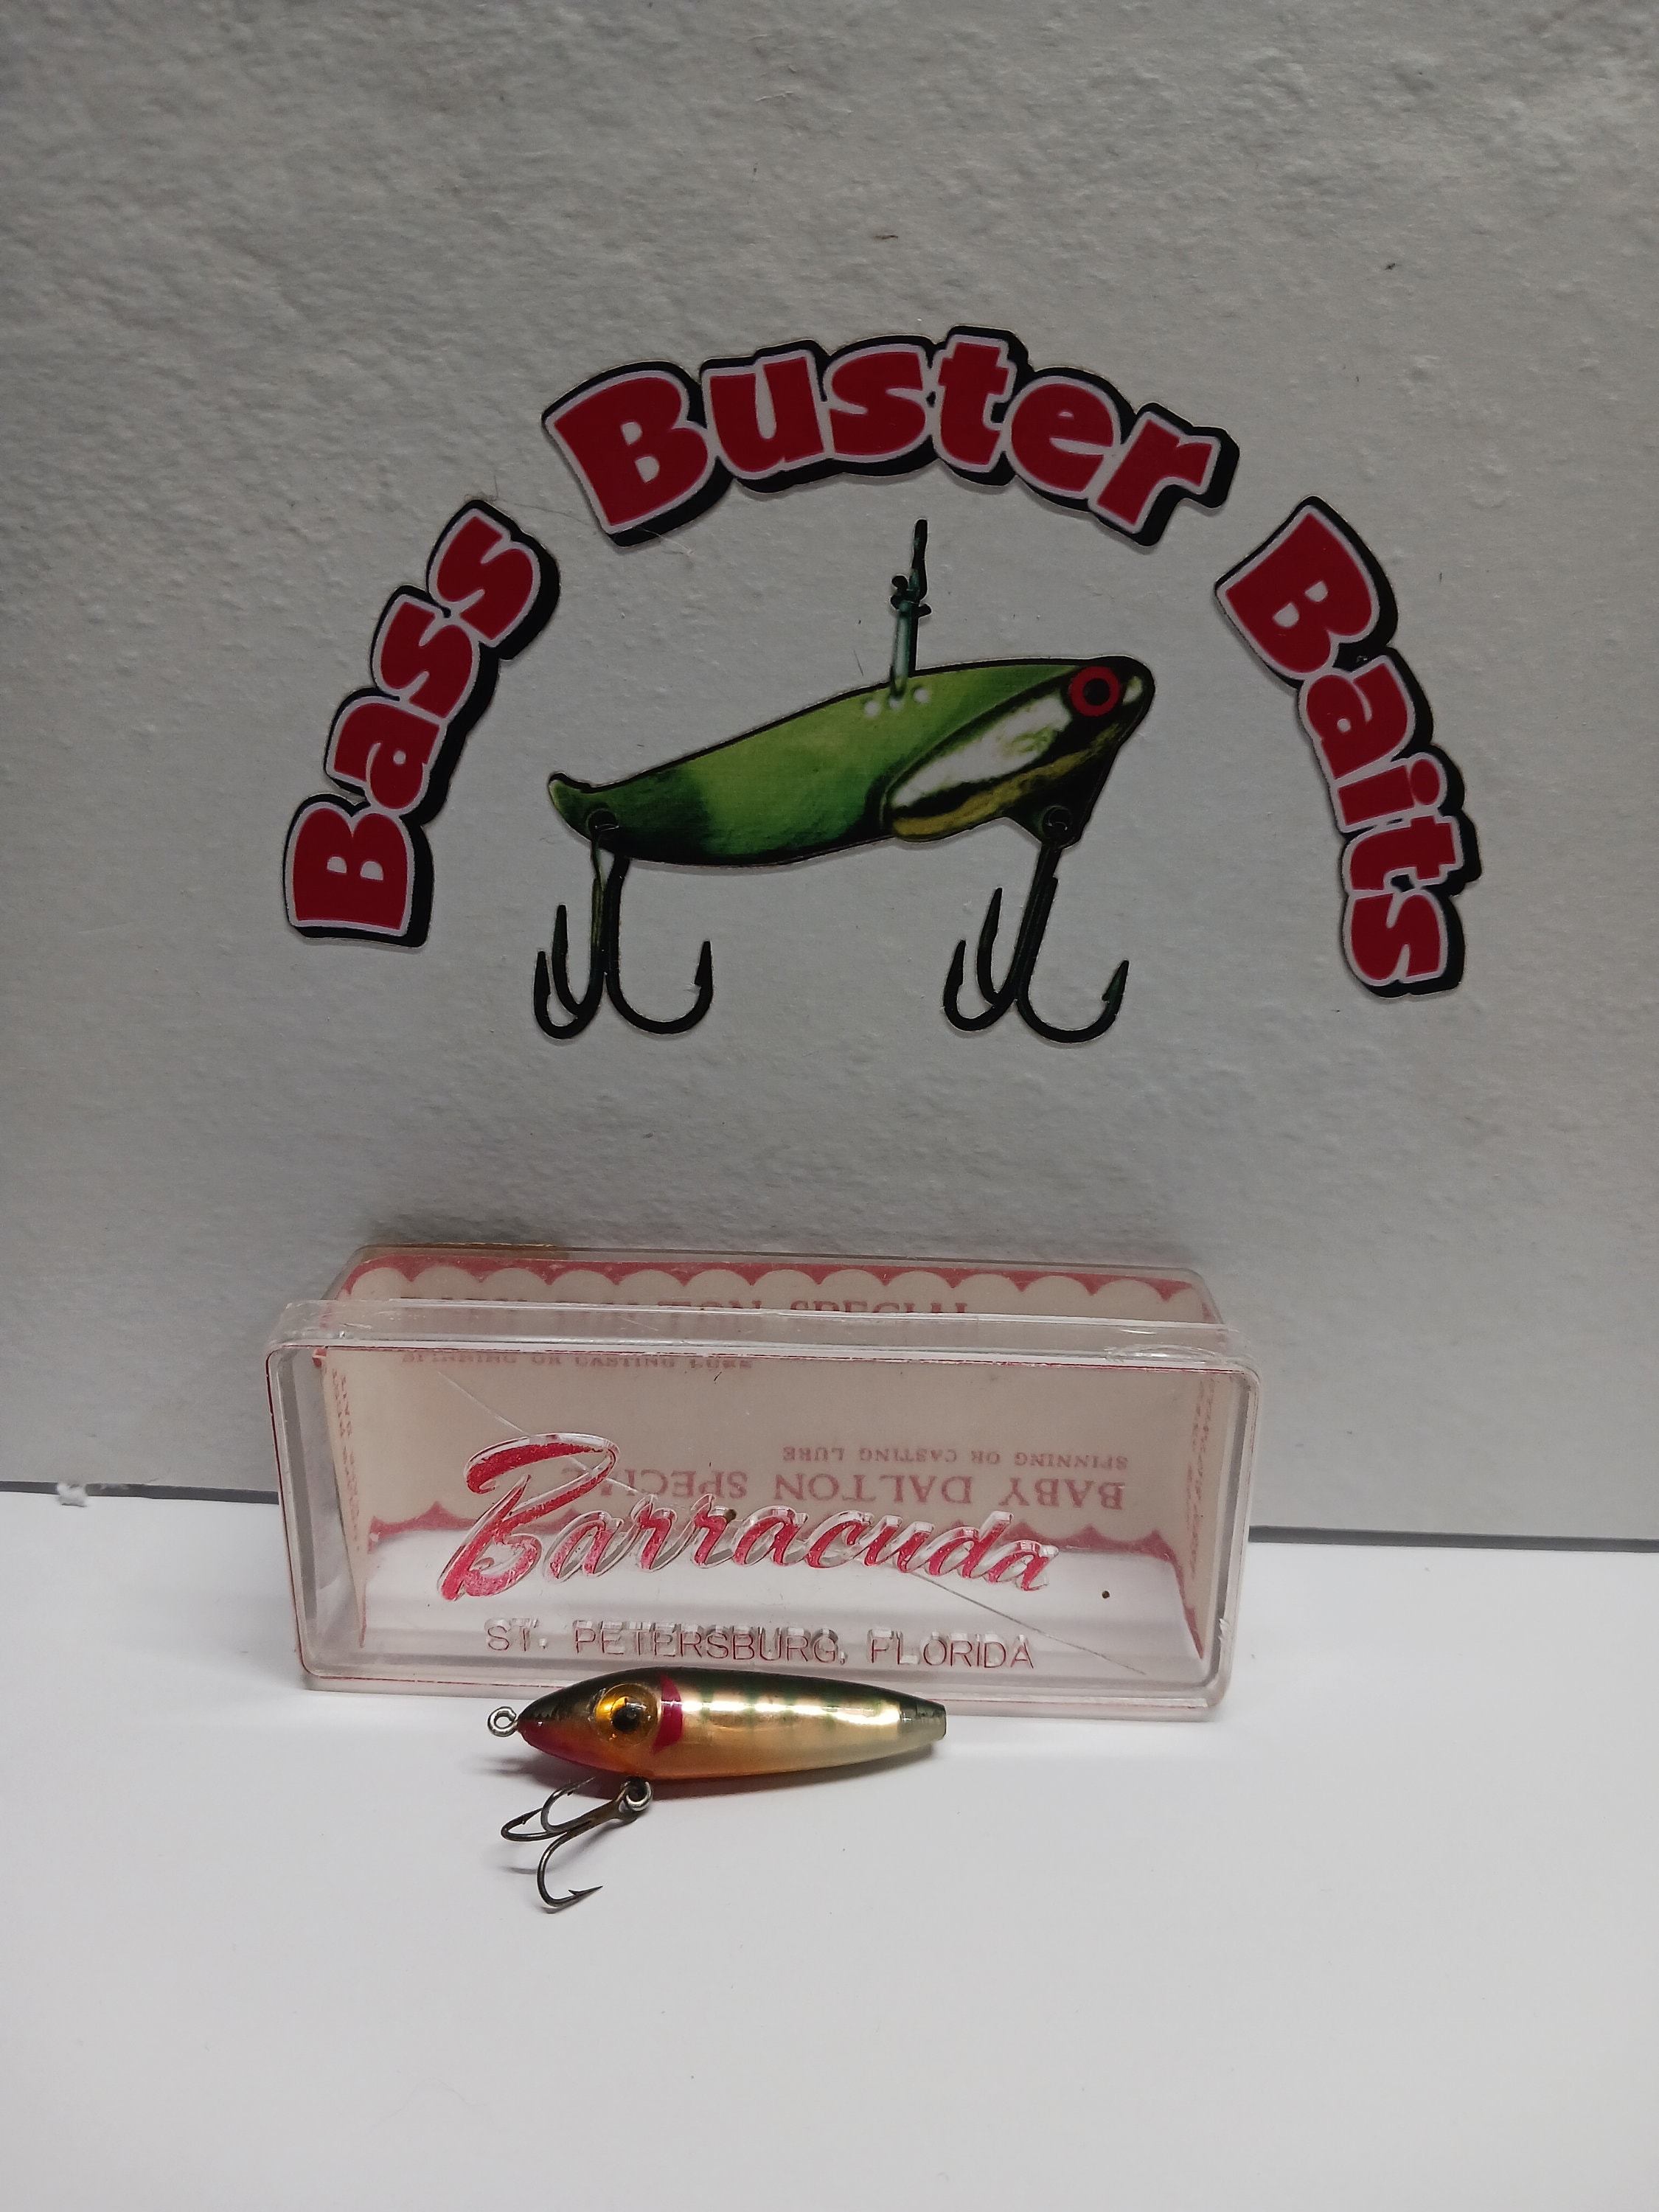 Barracuda Baby Dalton Special Fishing Lure From 1960s1970s 